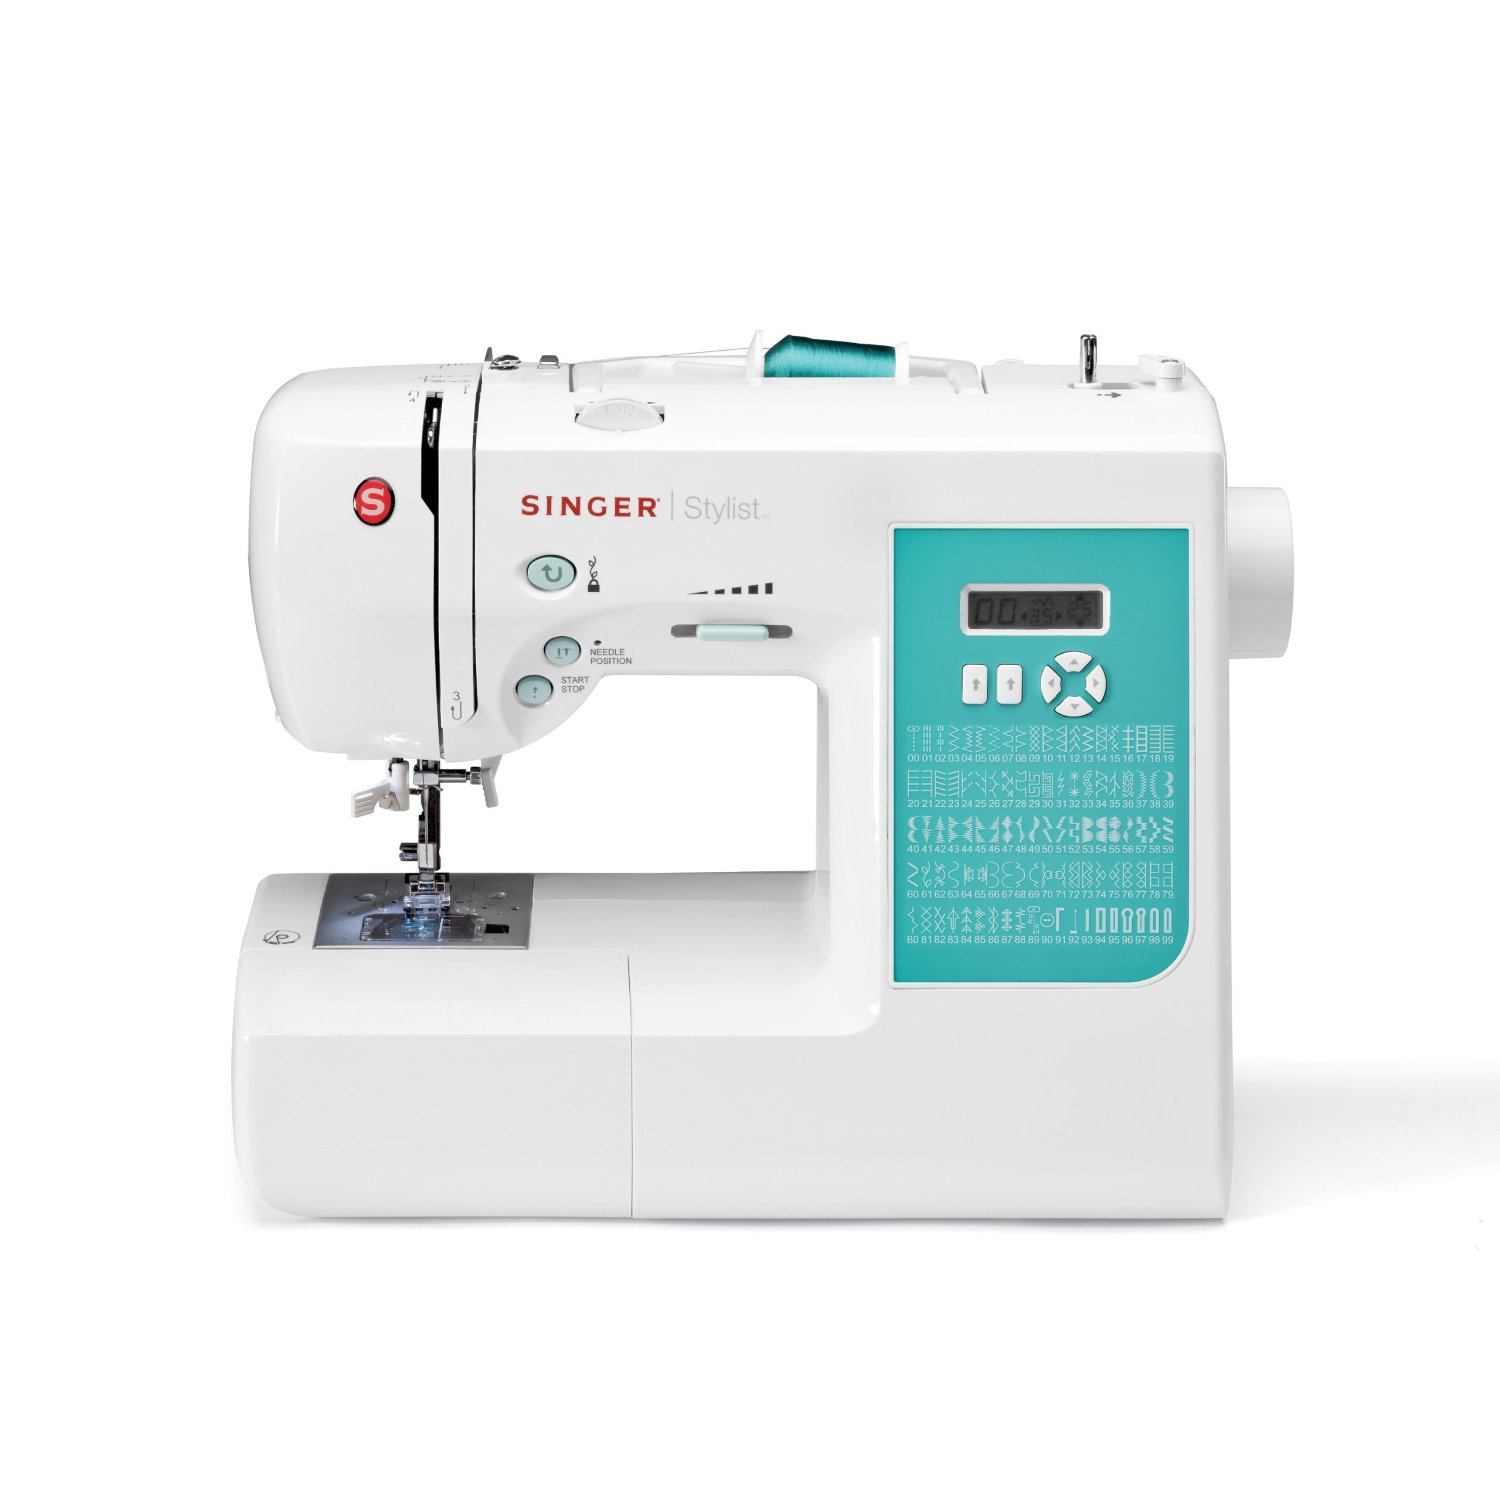 Save on Singer 7258 100-Stitch Computerized Sewing Machine! Just $135.99!